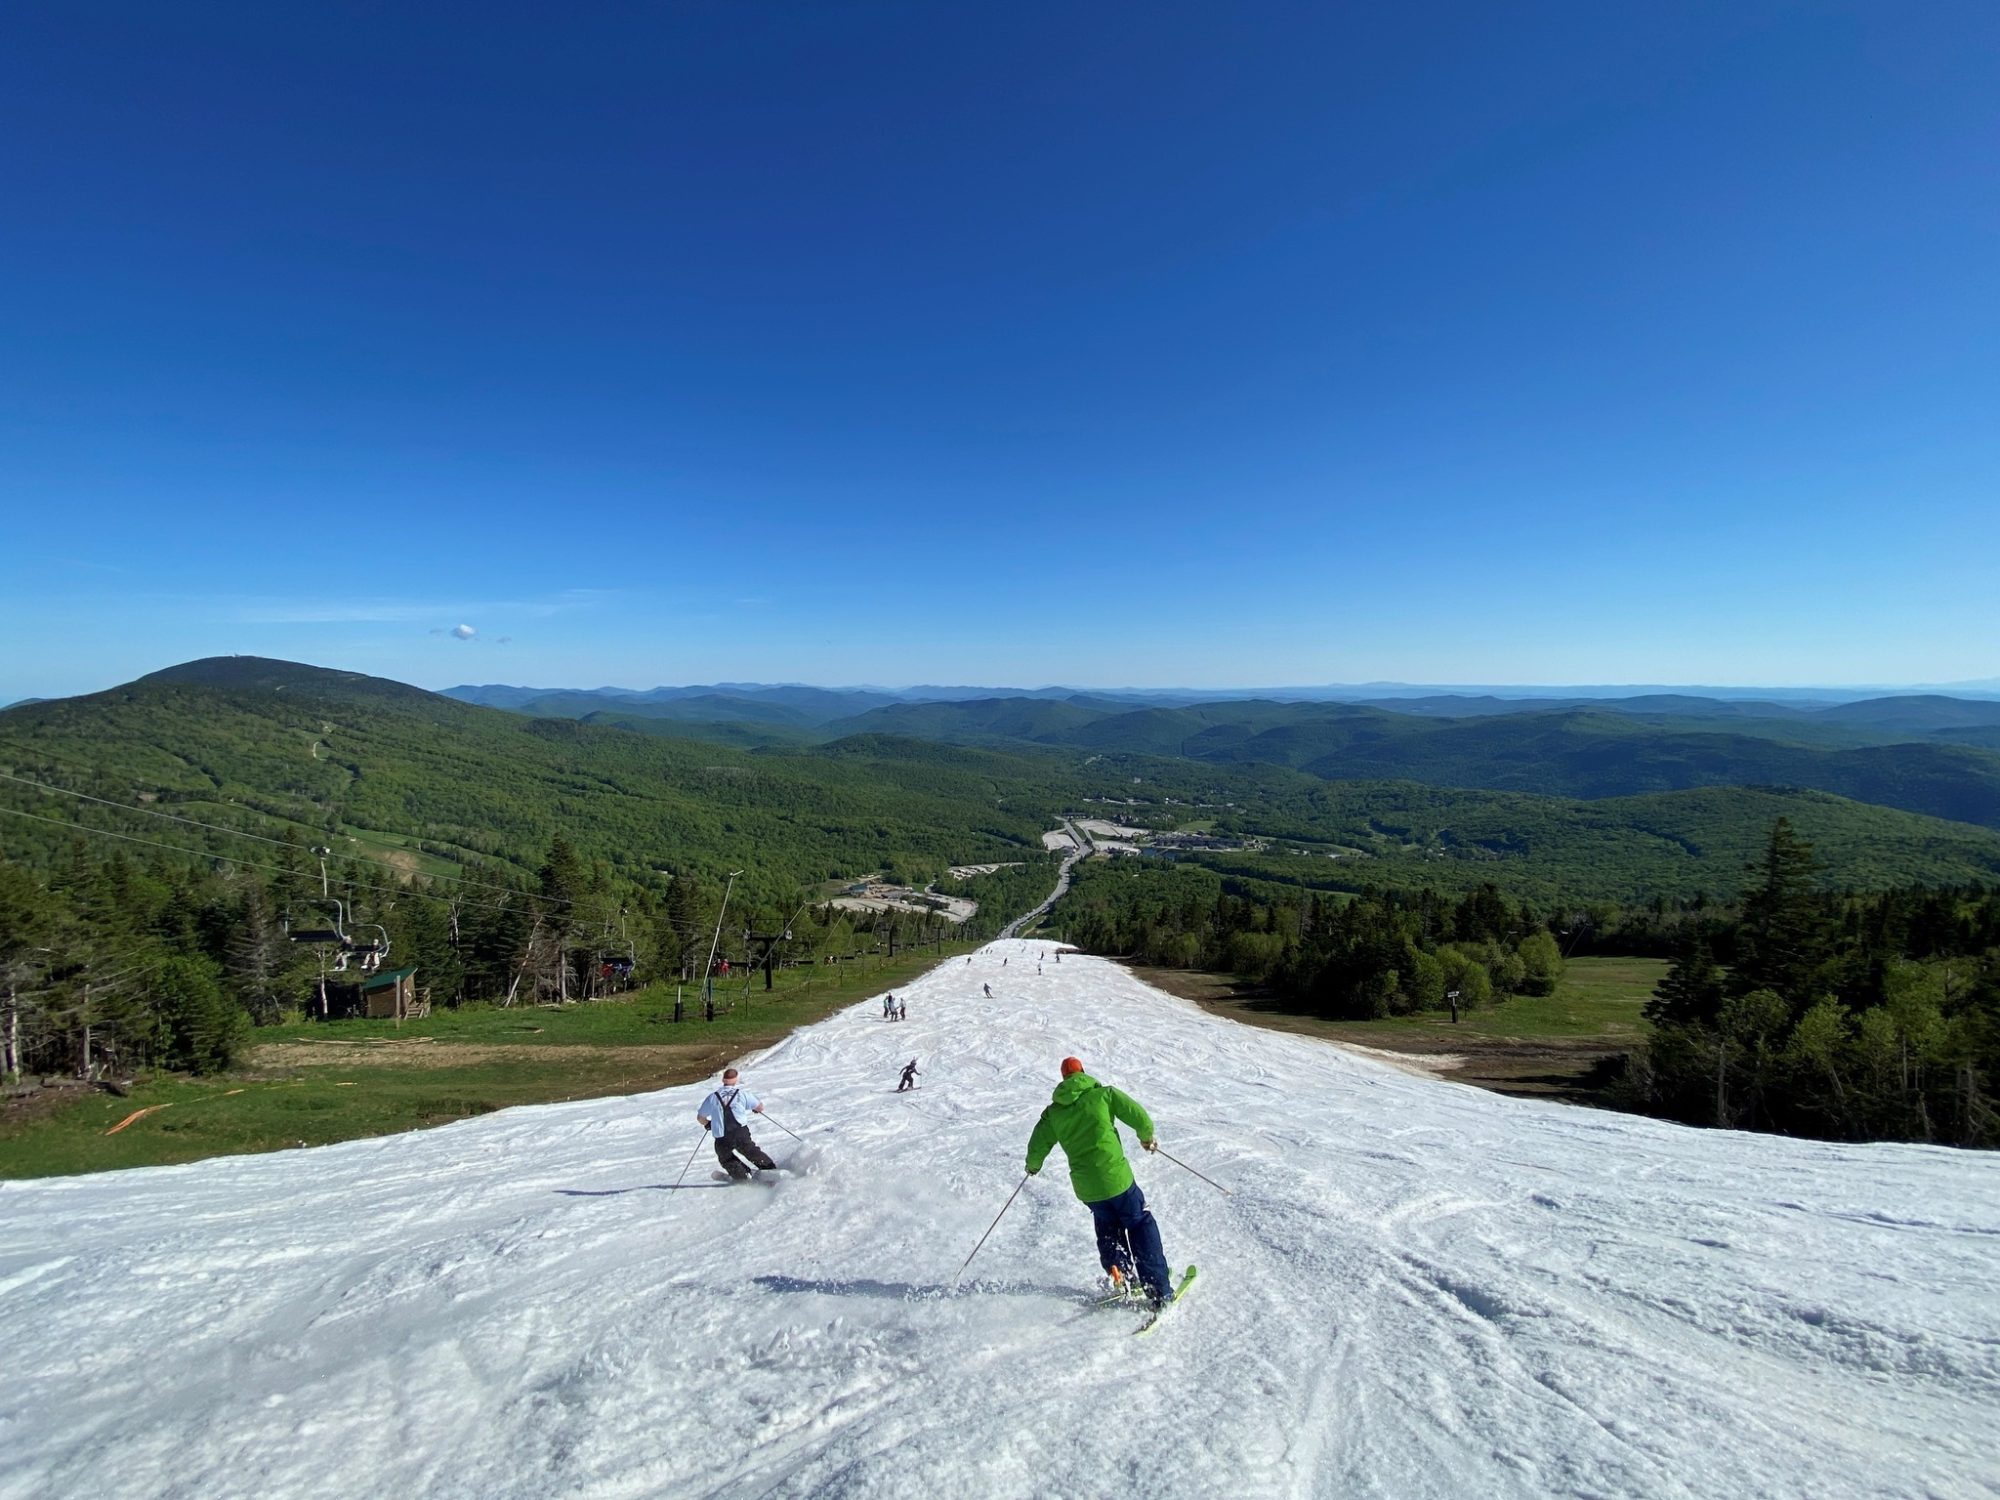 Killington Open For Skiing in June For First Time Since 1990s InTheSnow